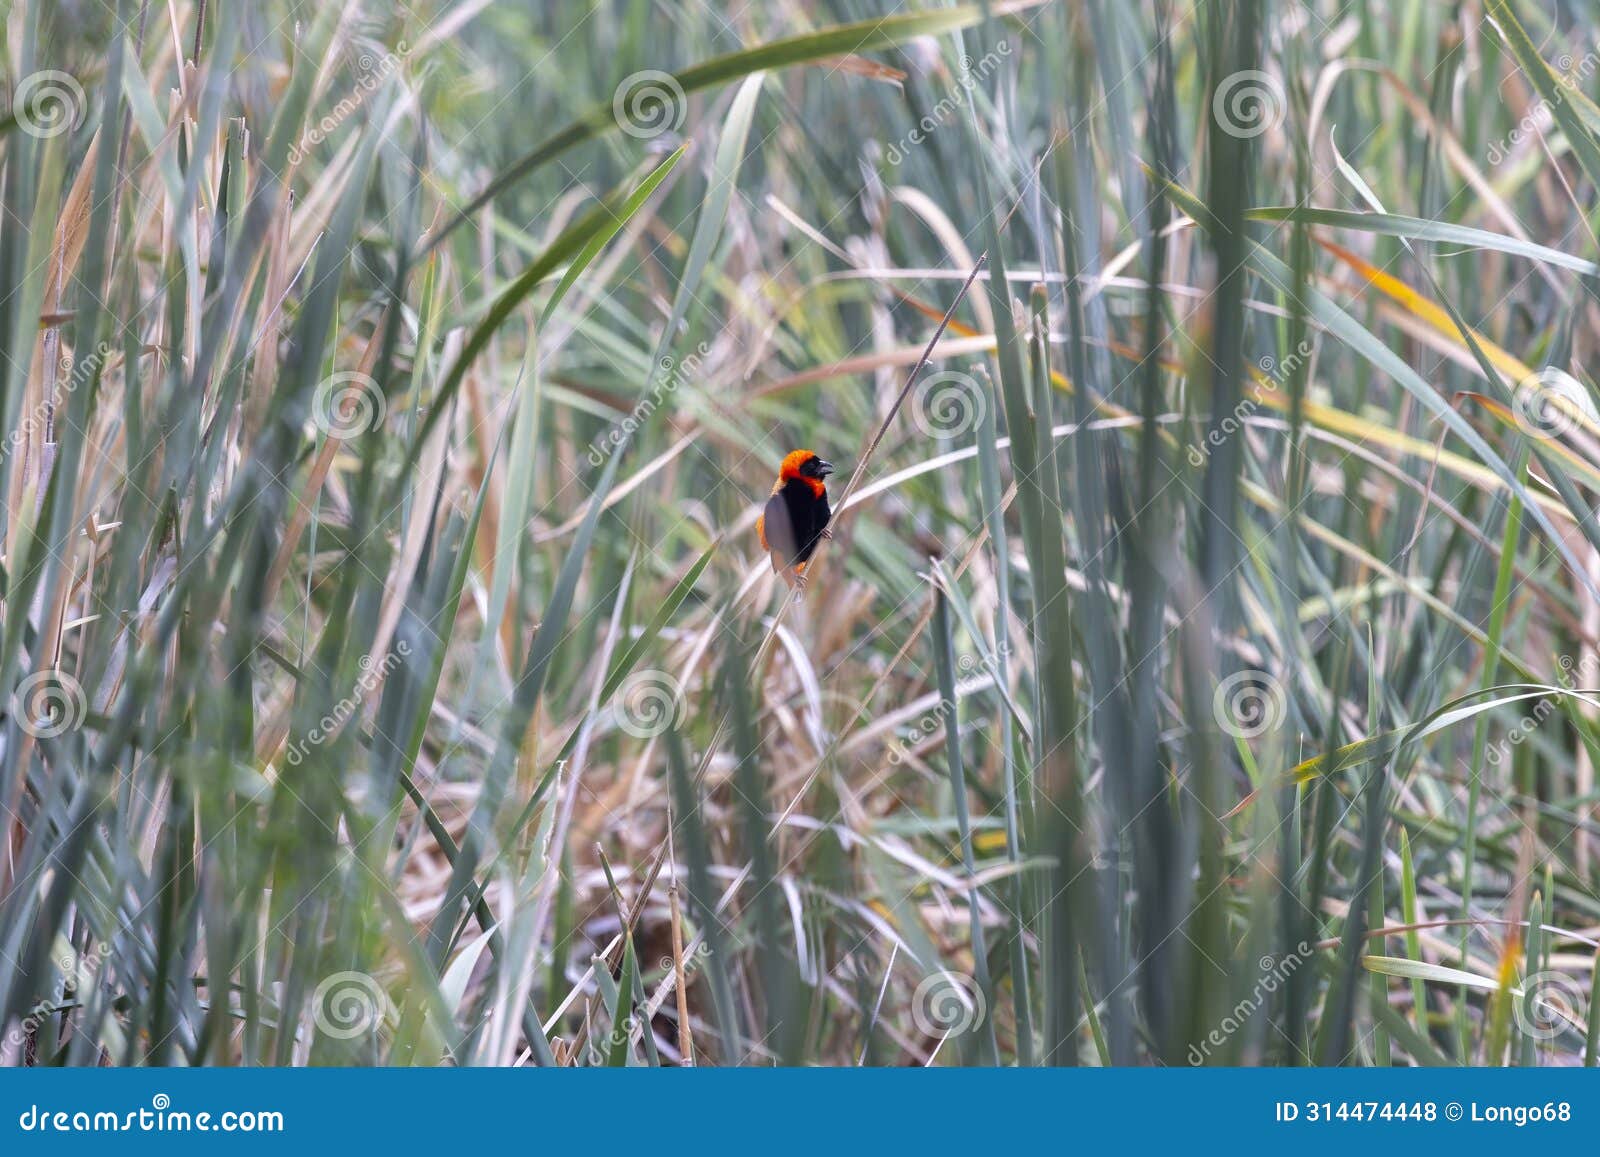 picture of a colorful orix weaver bird sitting in grass in namibia